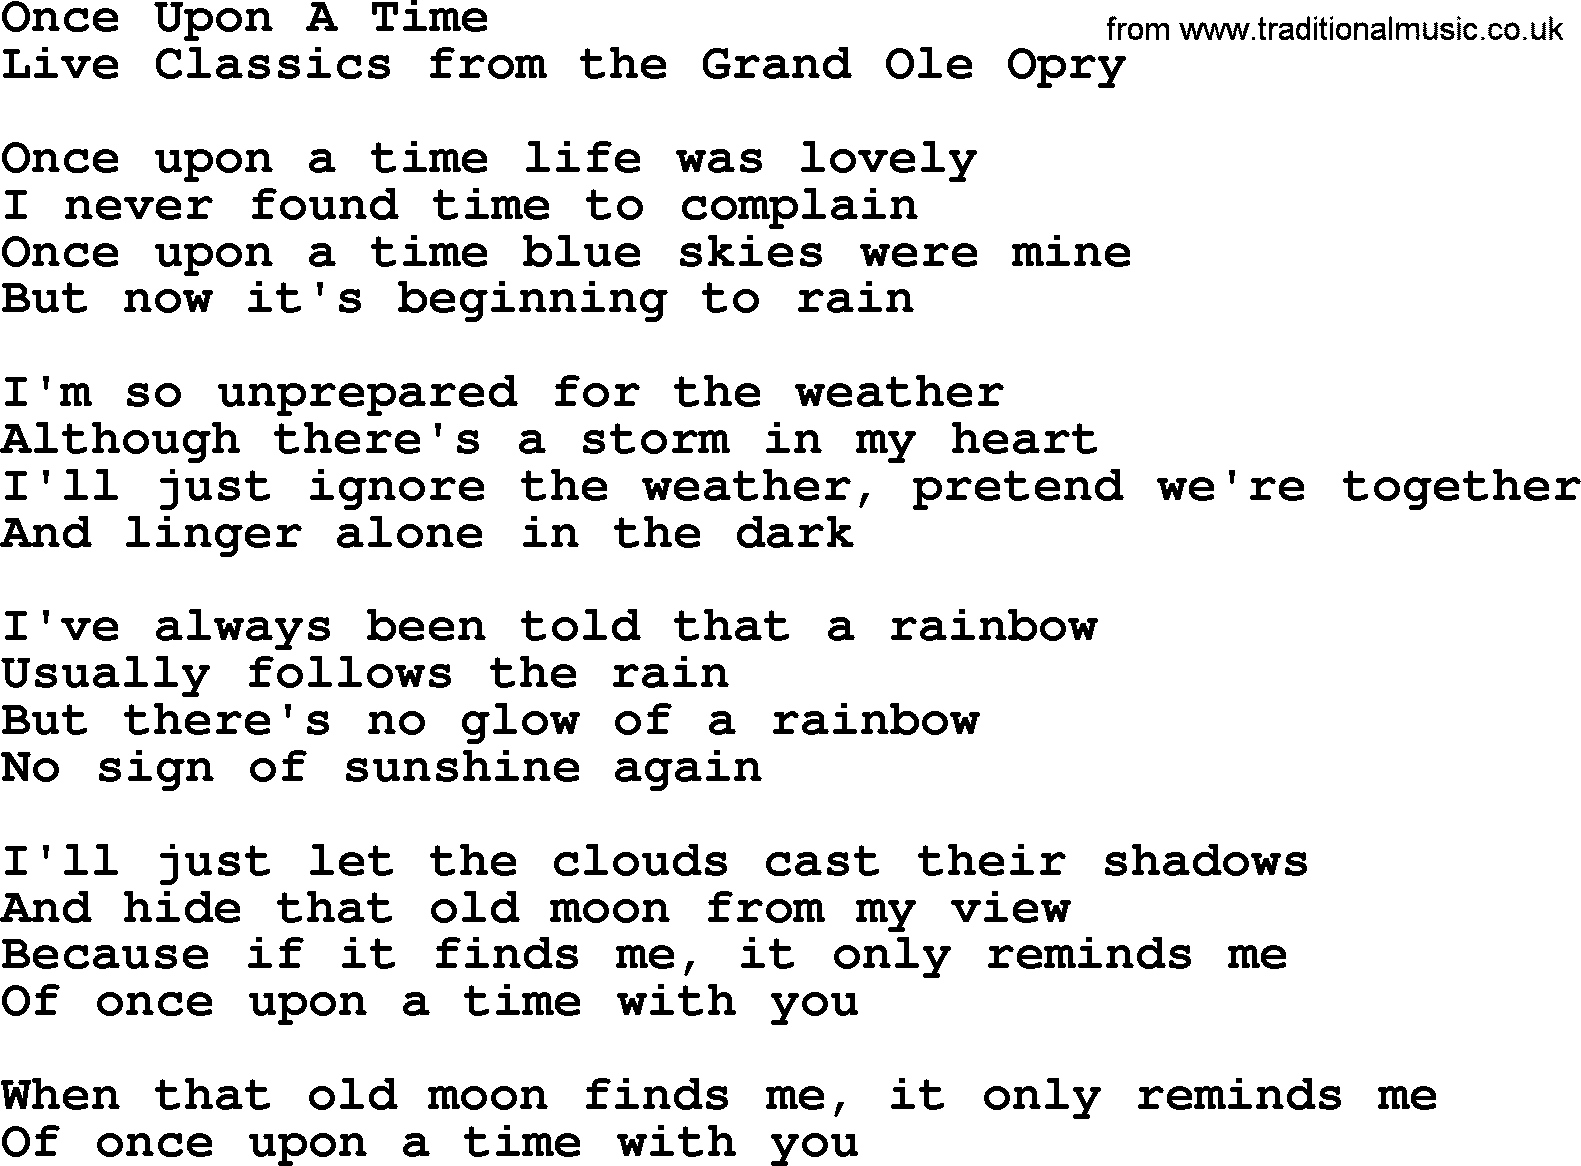 Marty Robbins song: Once Upon A Time, lyrics